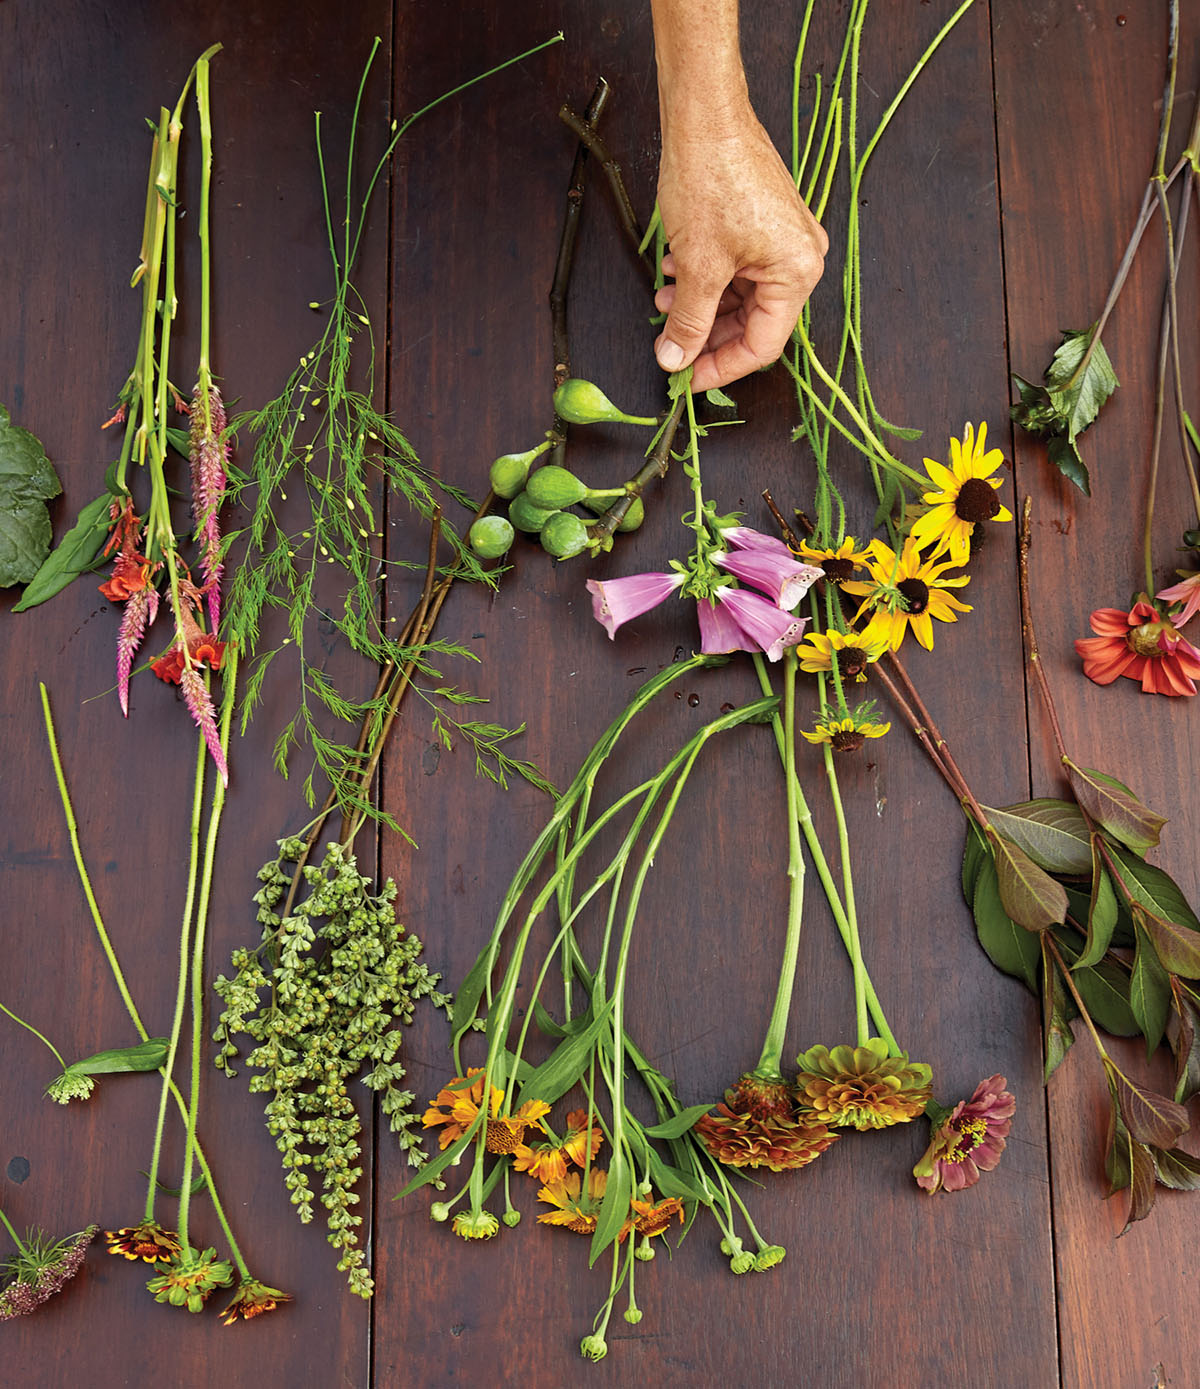 flowers and foliage for Kappi Naftel's floral tutorial laid out on a wooden work surface